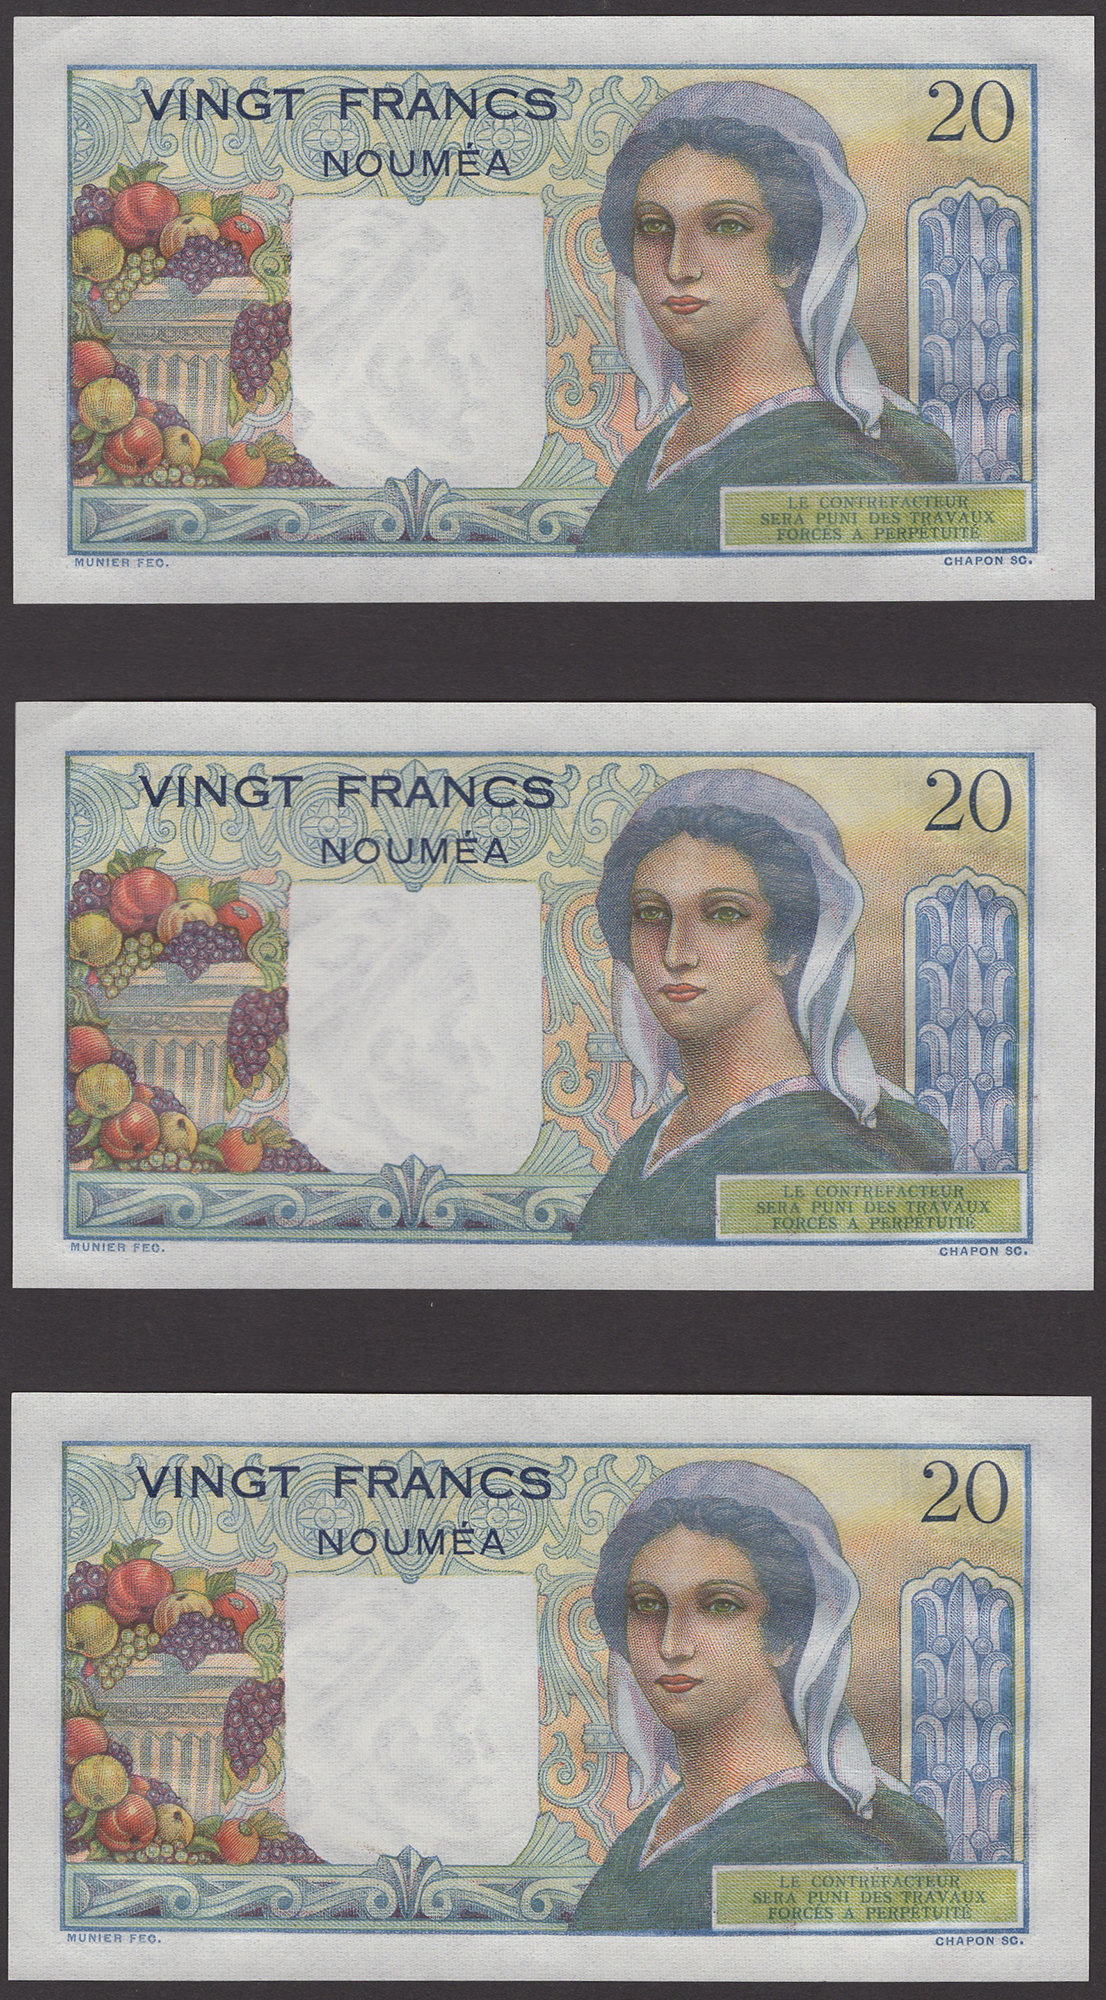 Banque de l'Indochine, New Caledonia, 20 Francs (5), ND (1951), serial number D.118 684-85... - Image 2 of 4